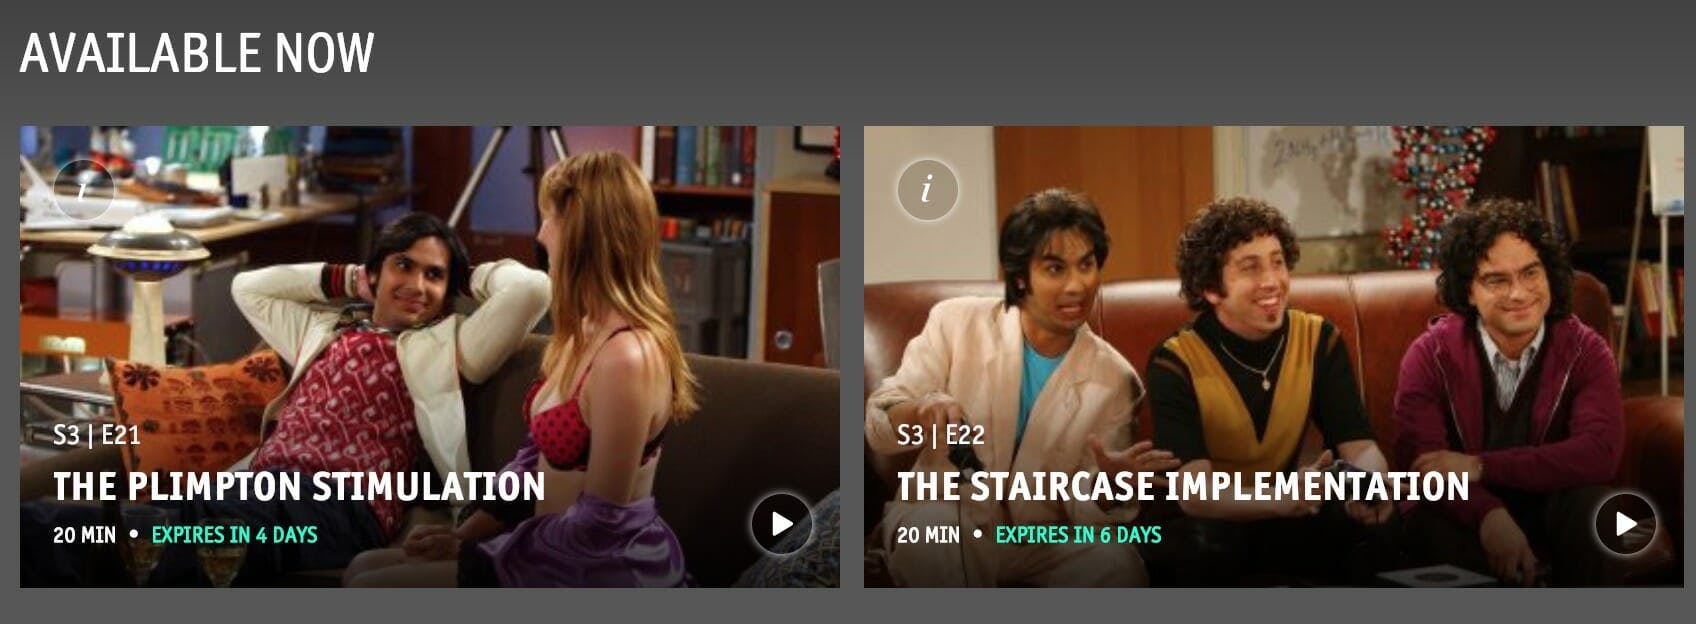 the big bang theory full episodes on tbs